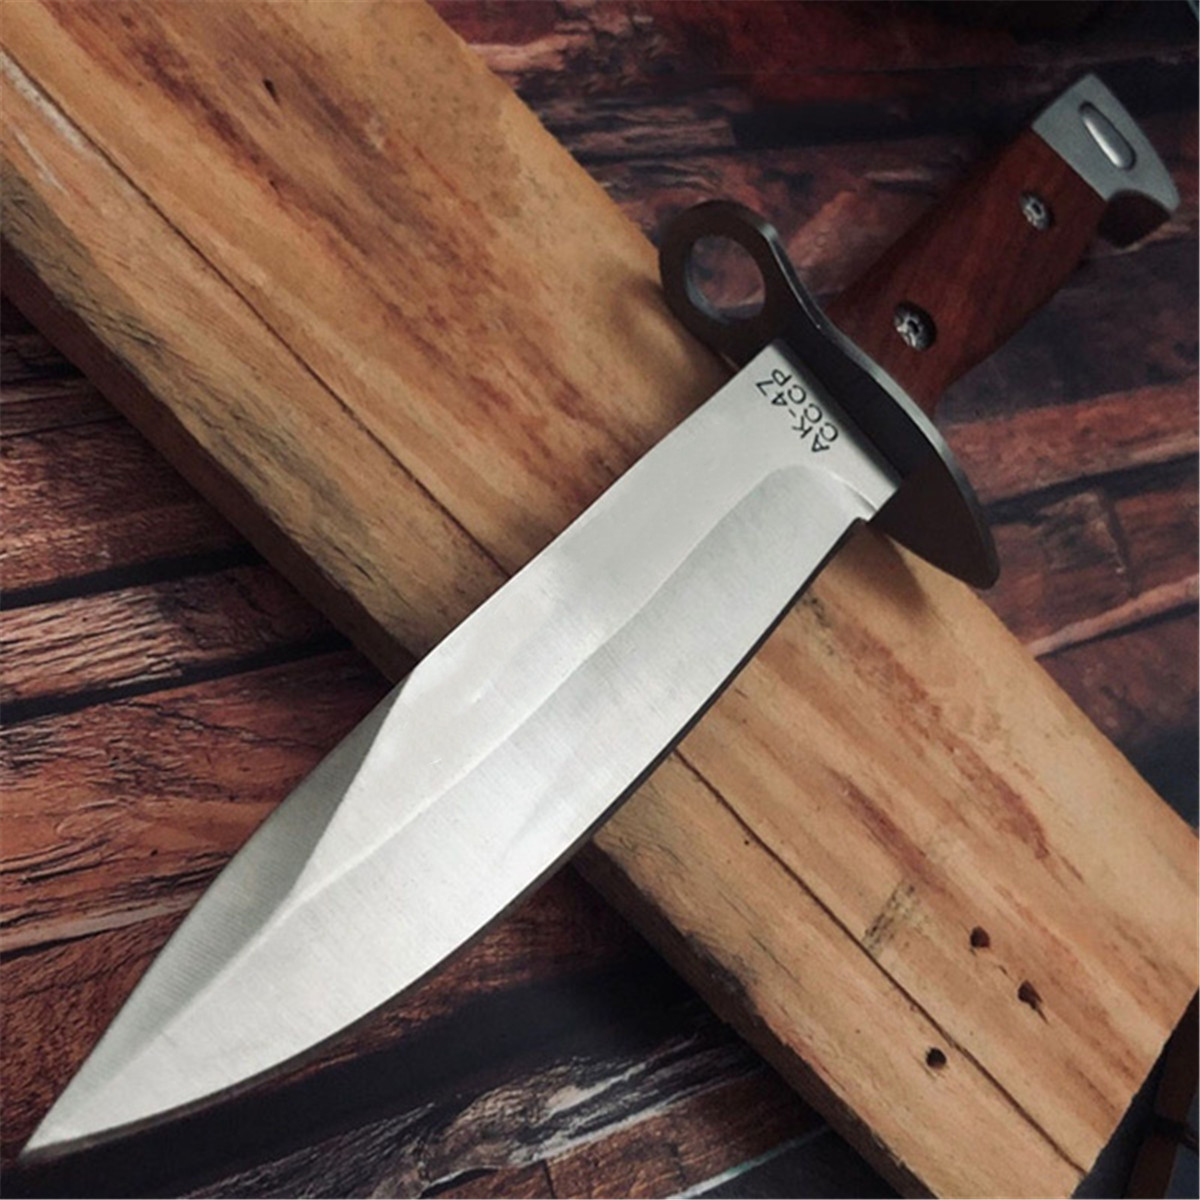 

AK47 Fixed Blade Tactical Knife 440C Blade Wood Handle Outdoor Camping Hunting Survival Pocket Utility EDC Self Defense Tools Military Knives